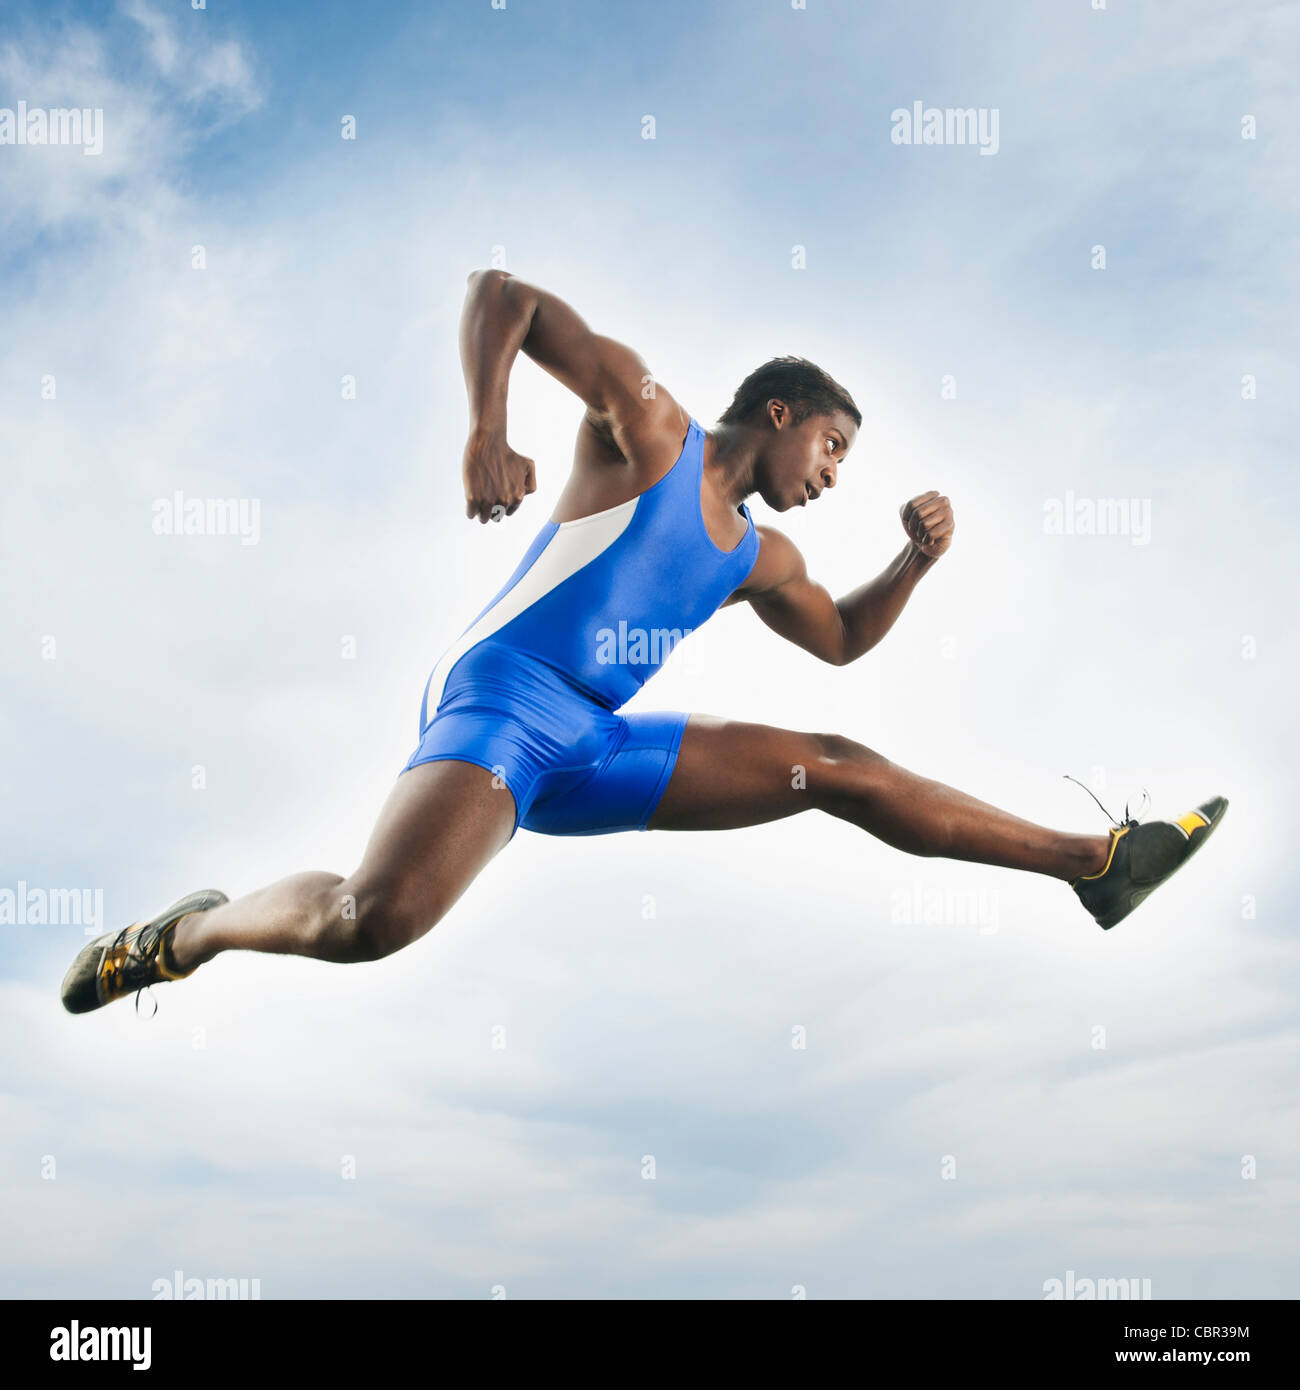 African American athlete jumping in mid-air Stock Photo